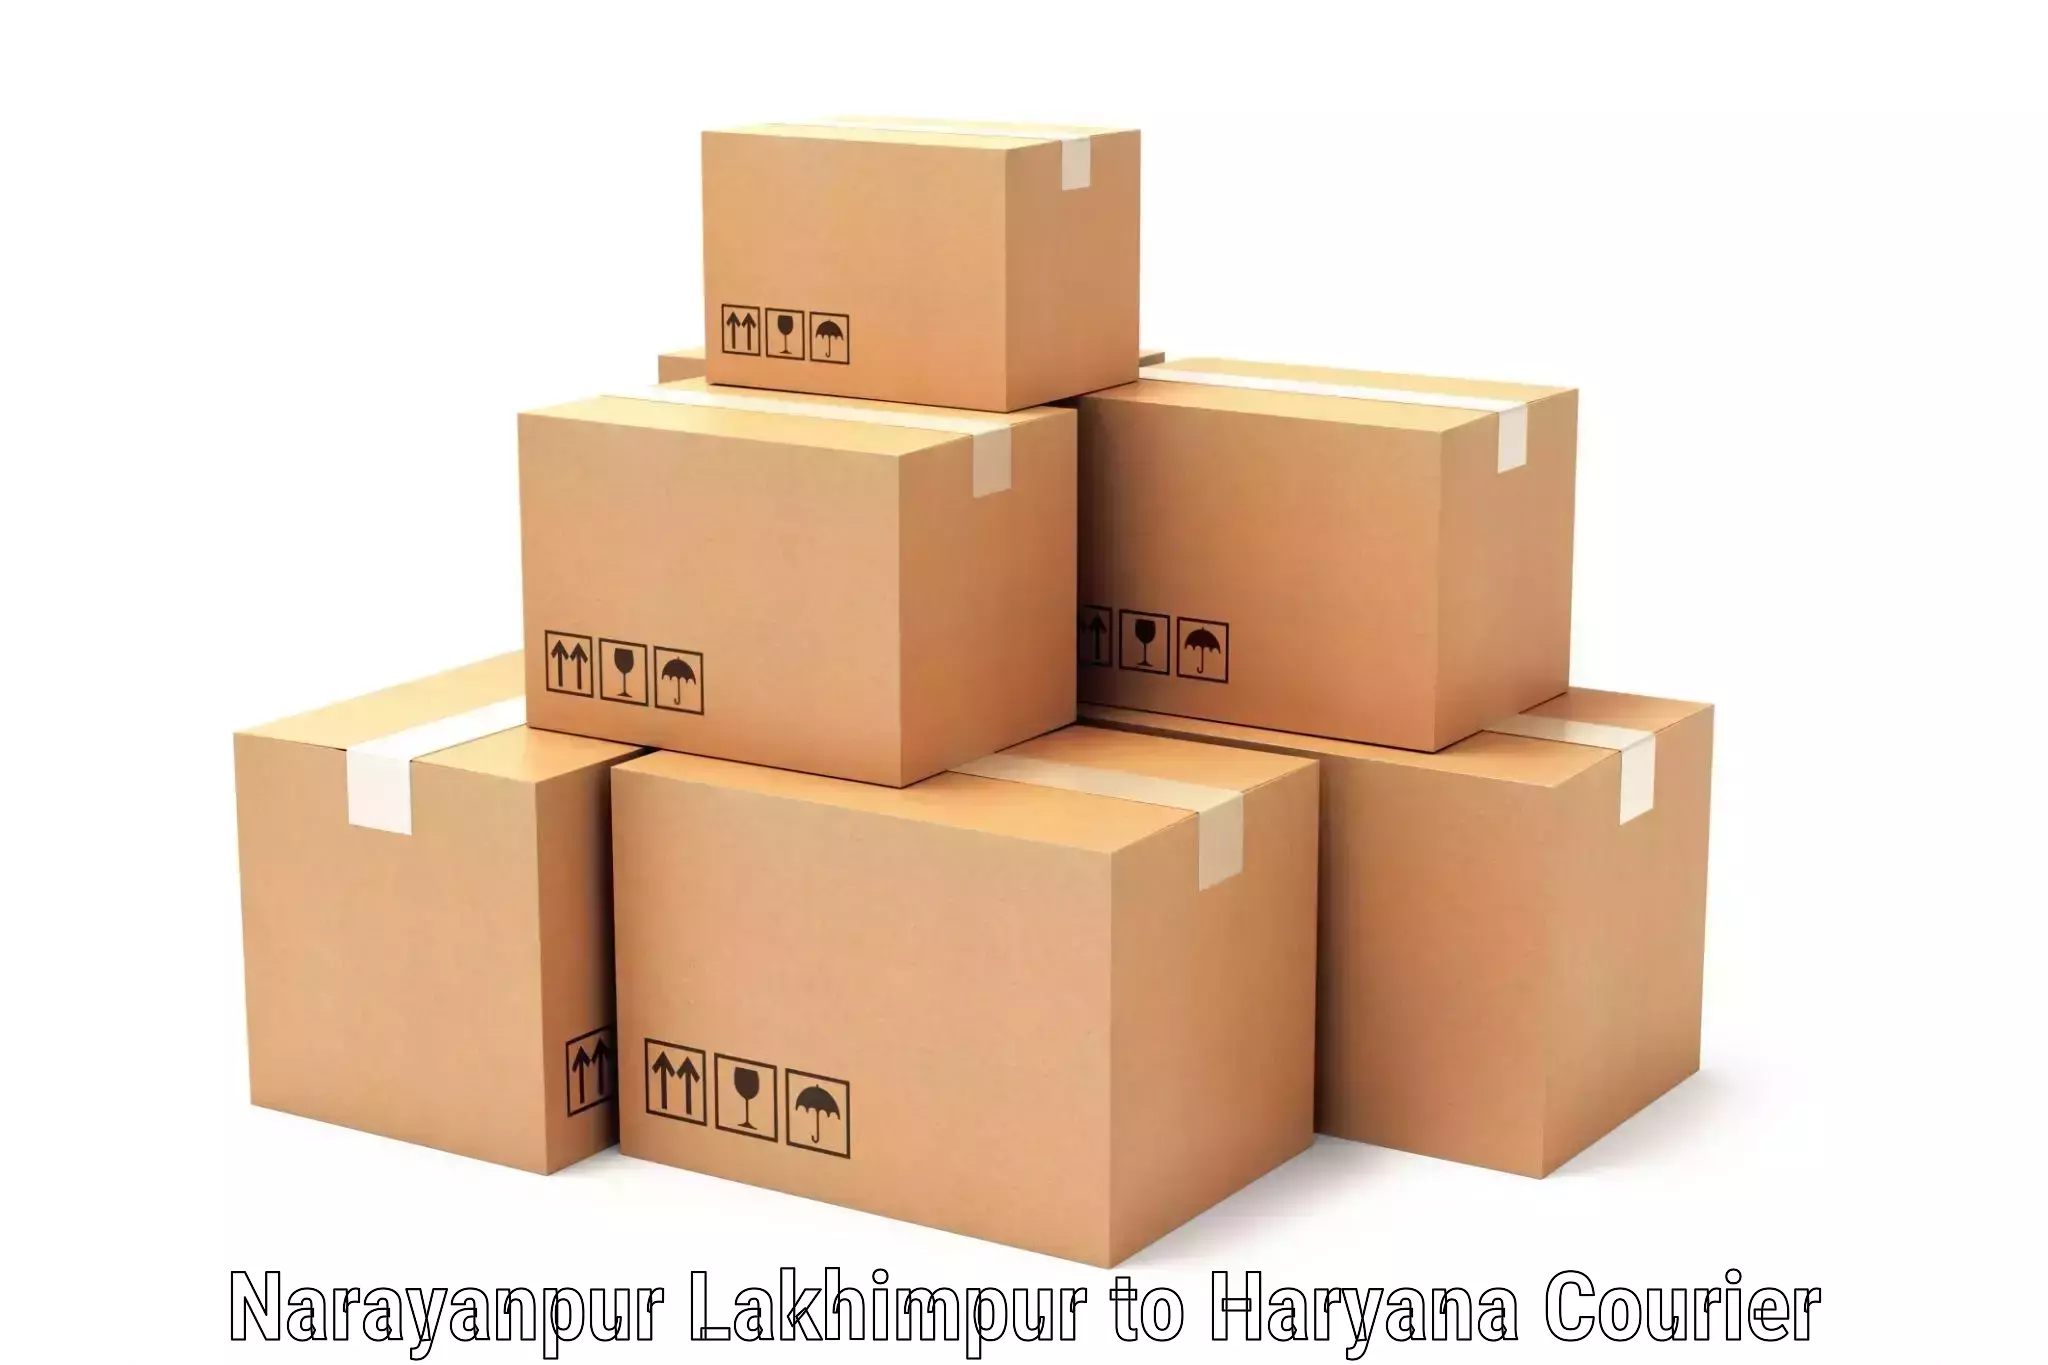 Cost-effective freight solutions in Narayanpur Lakhimpur to Haryana